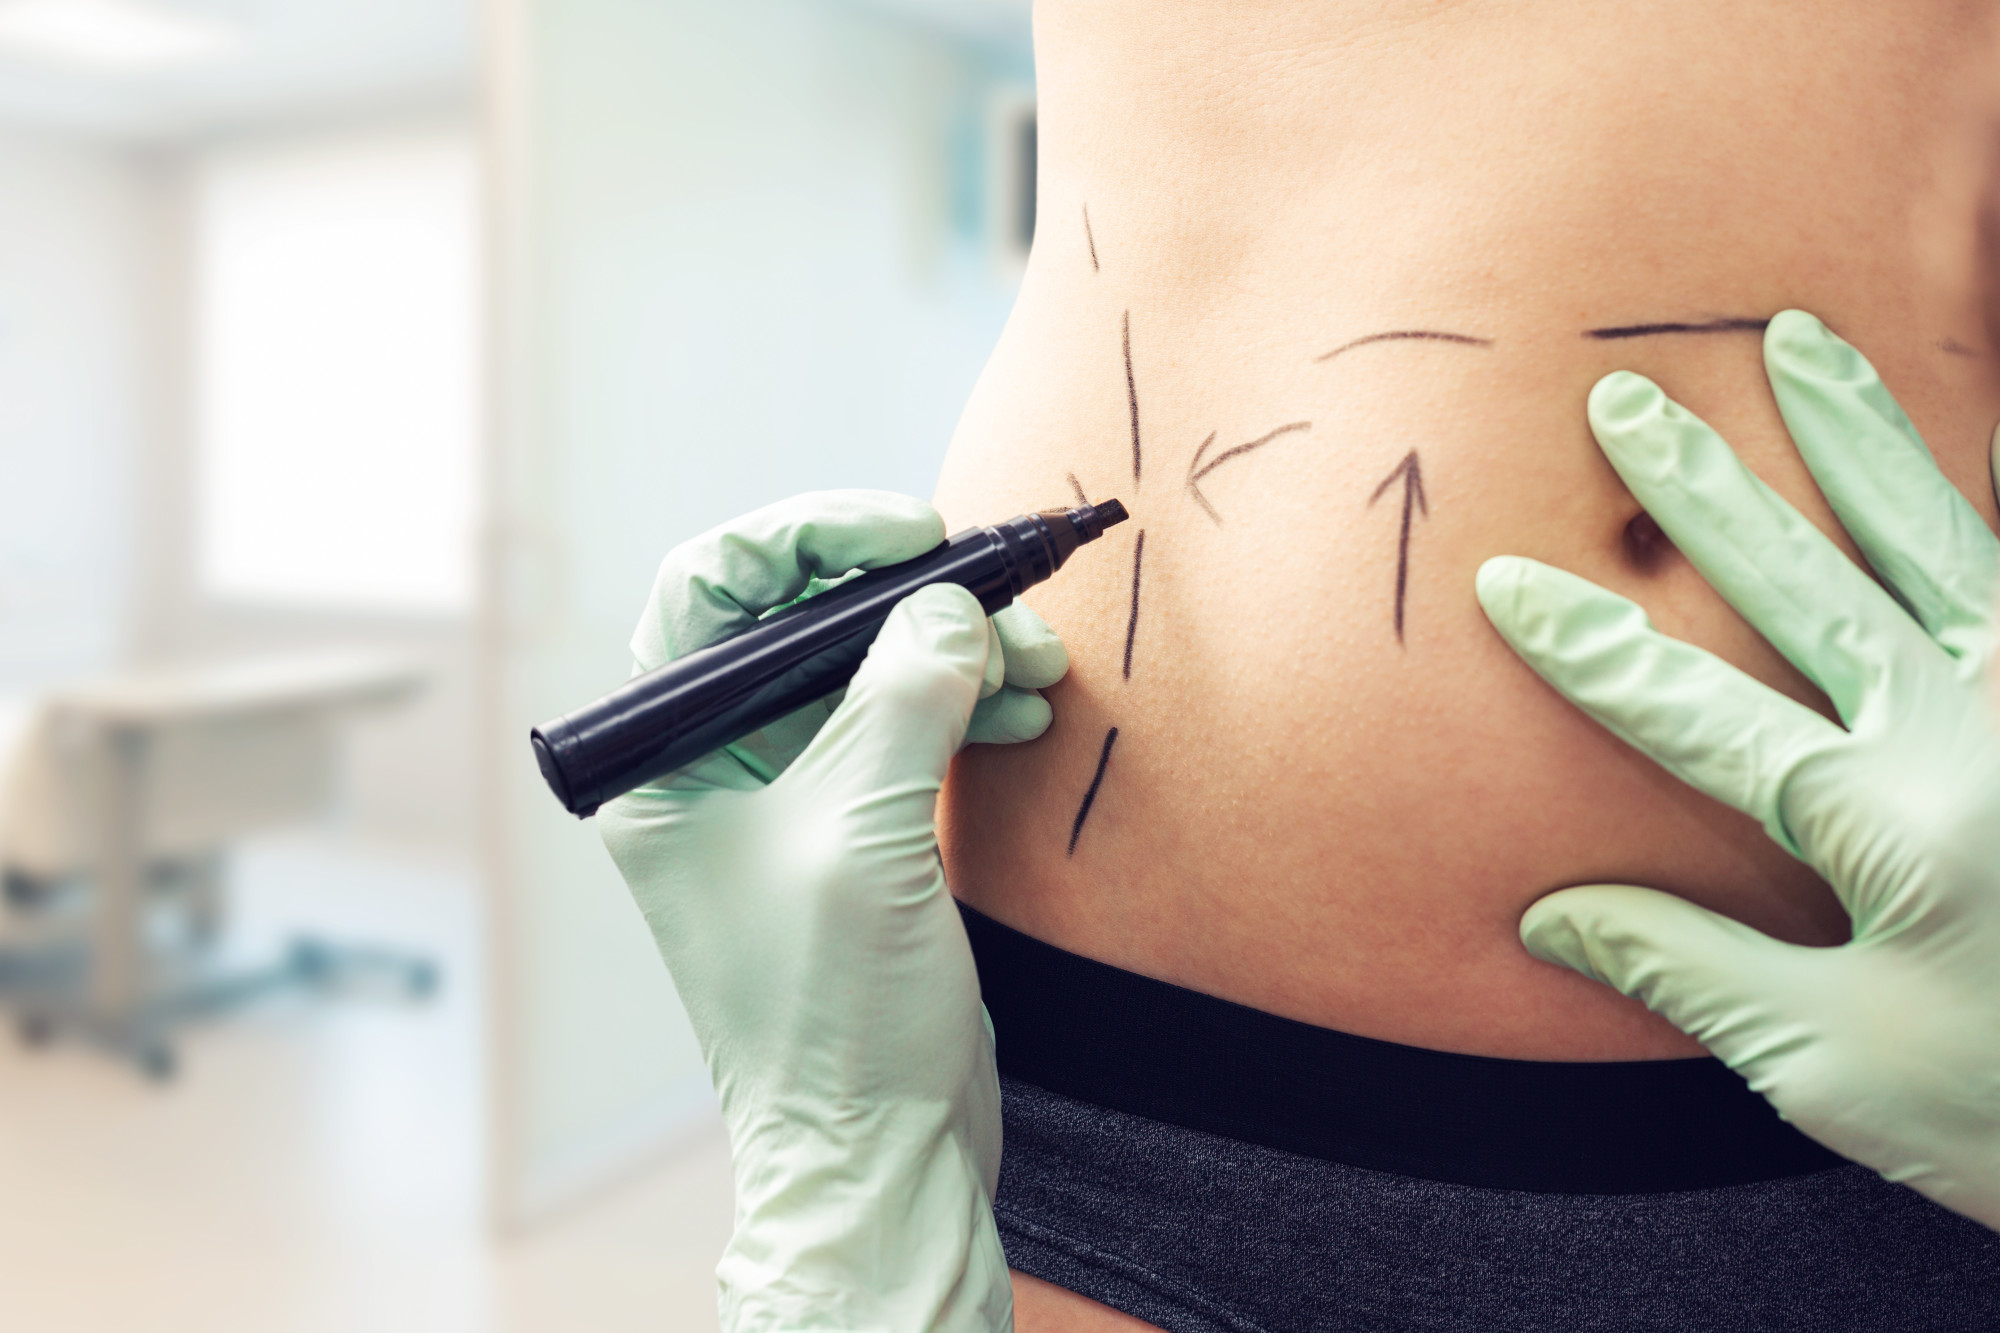 Finding the right surgeon for a tummy tuck procedure involves knowing your options. Here is everything you need to know about how to pick a tummy tuck surgeon.